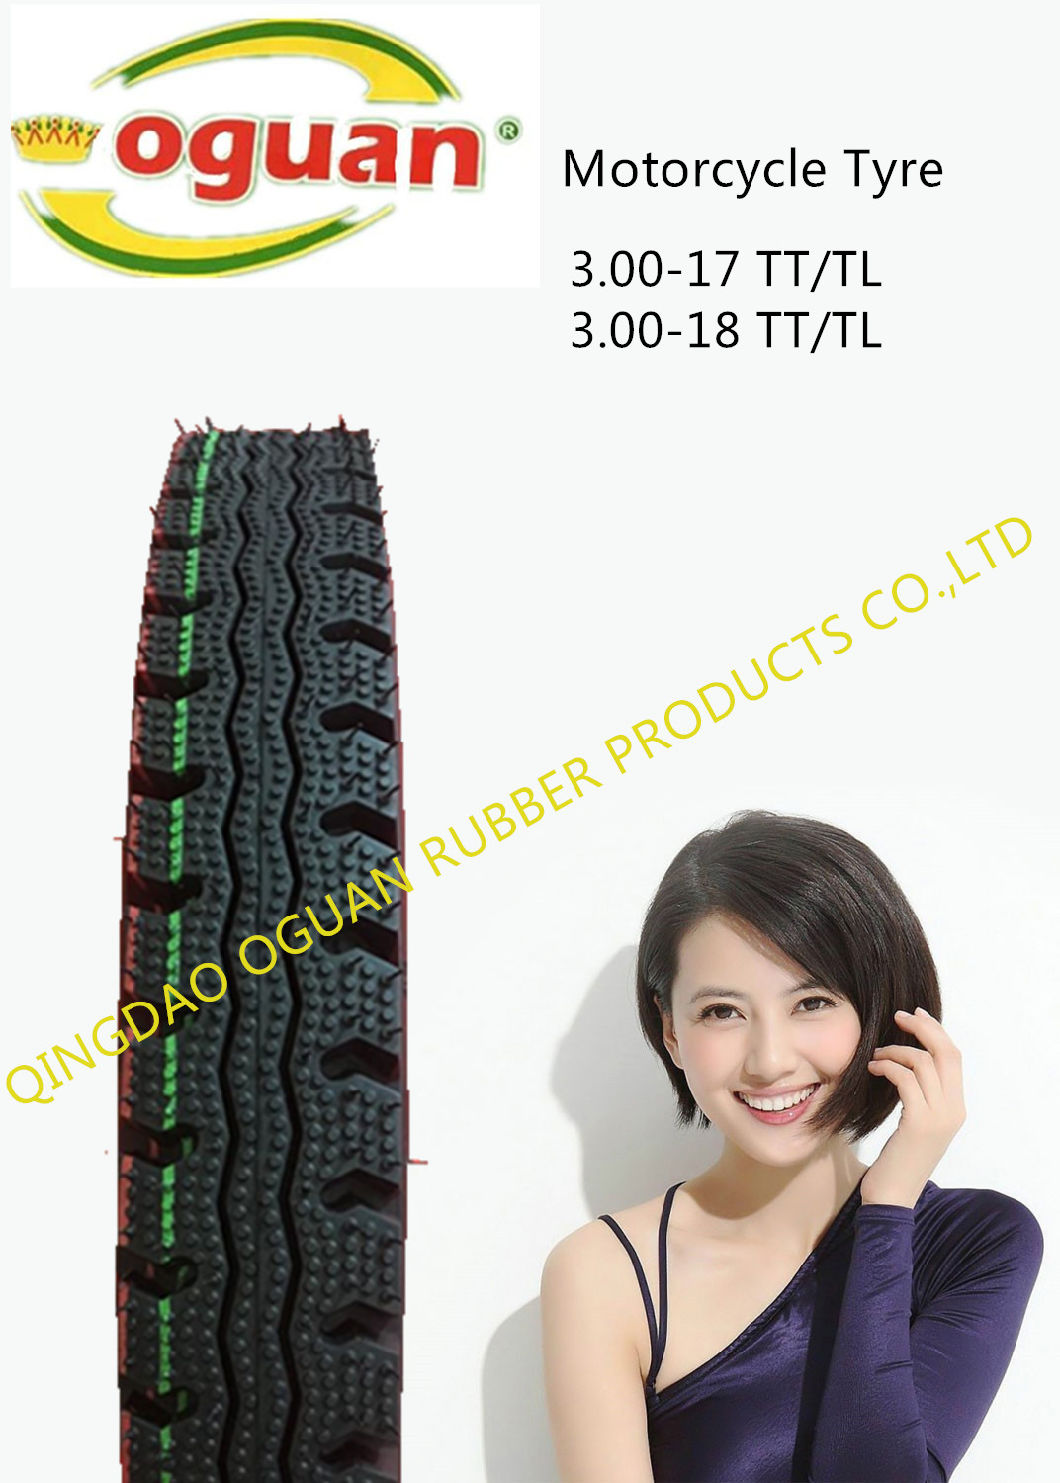 Novel High Rubber Containing Motorcycle Tyre